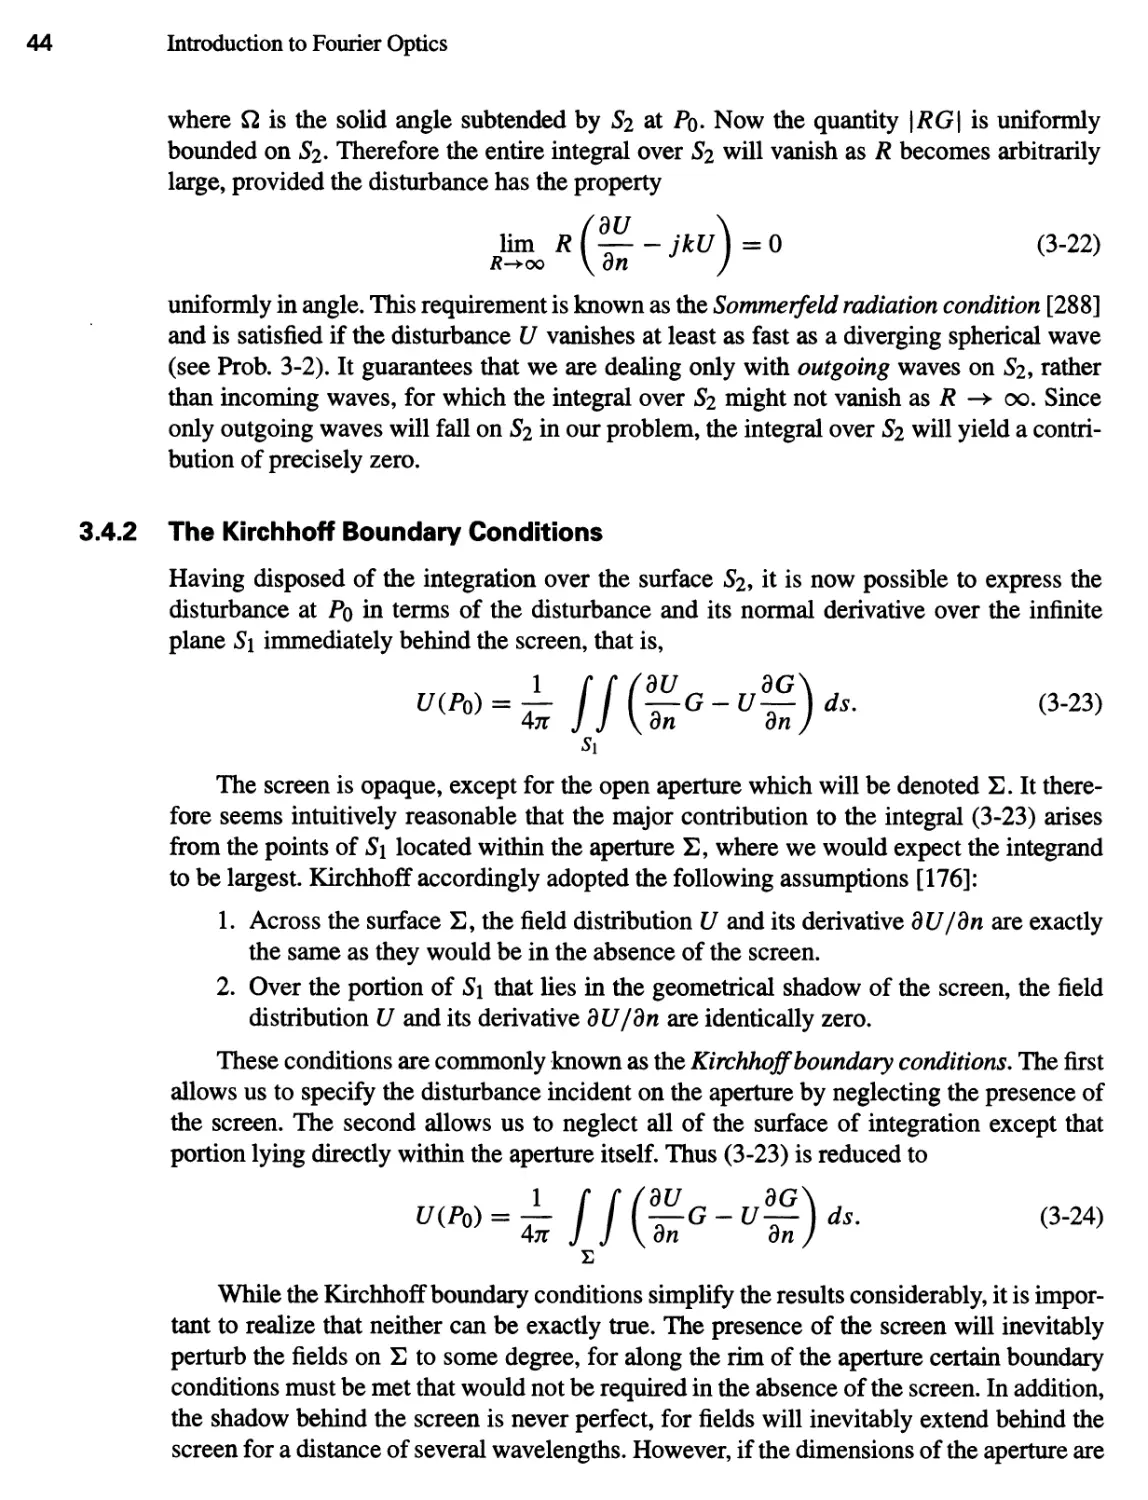 3.4.2 The Kirchhoff Boundary Conditions 44